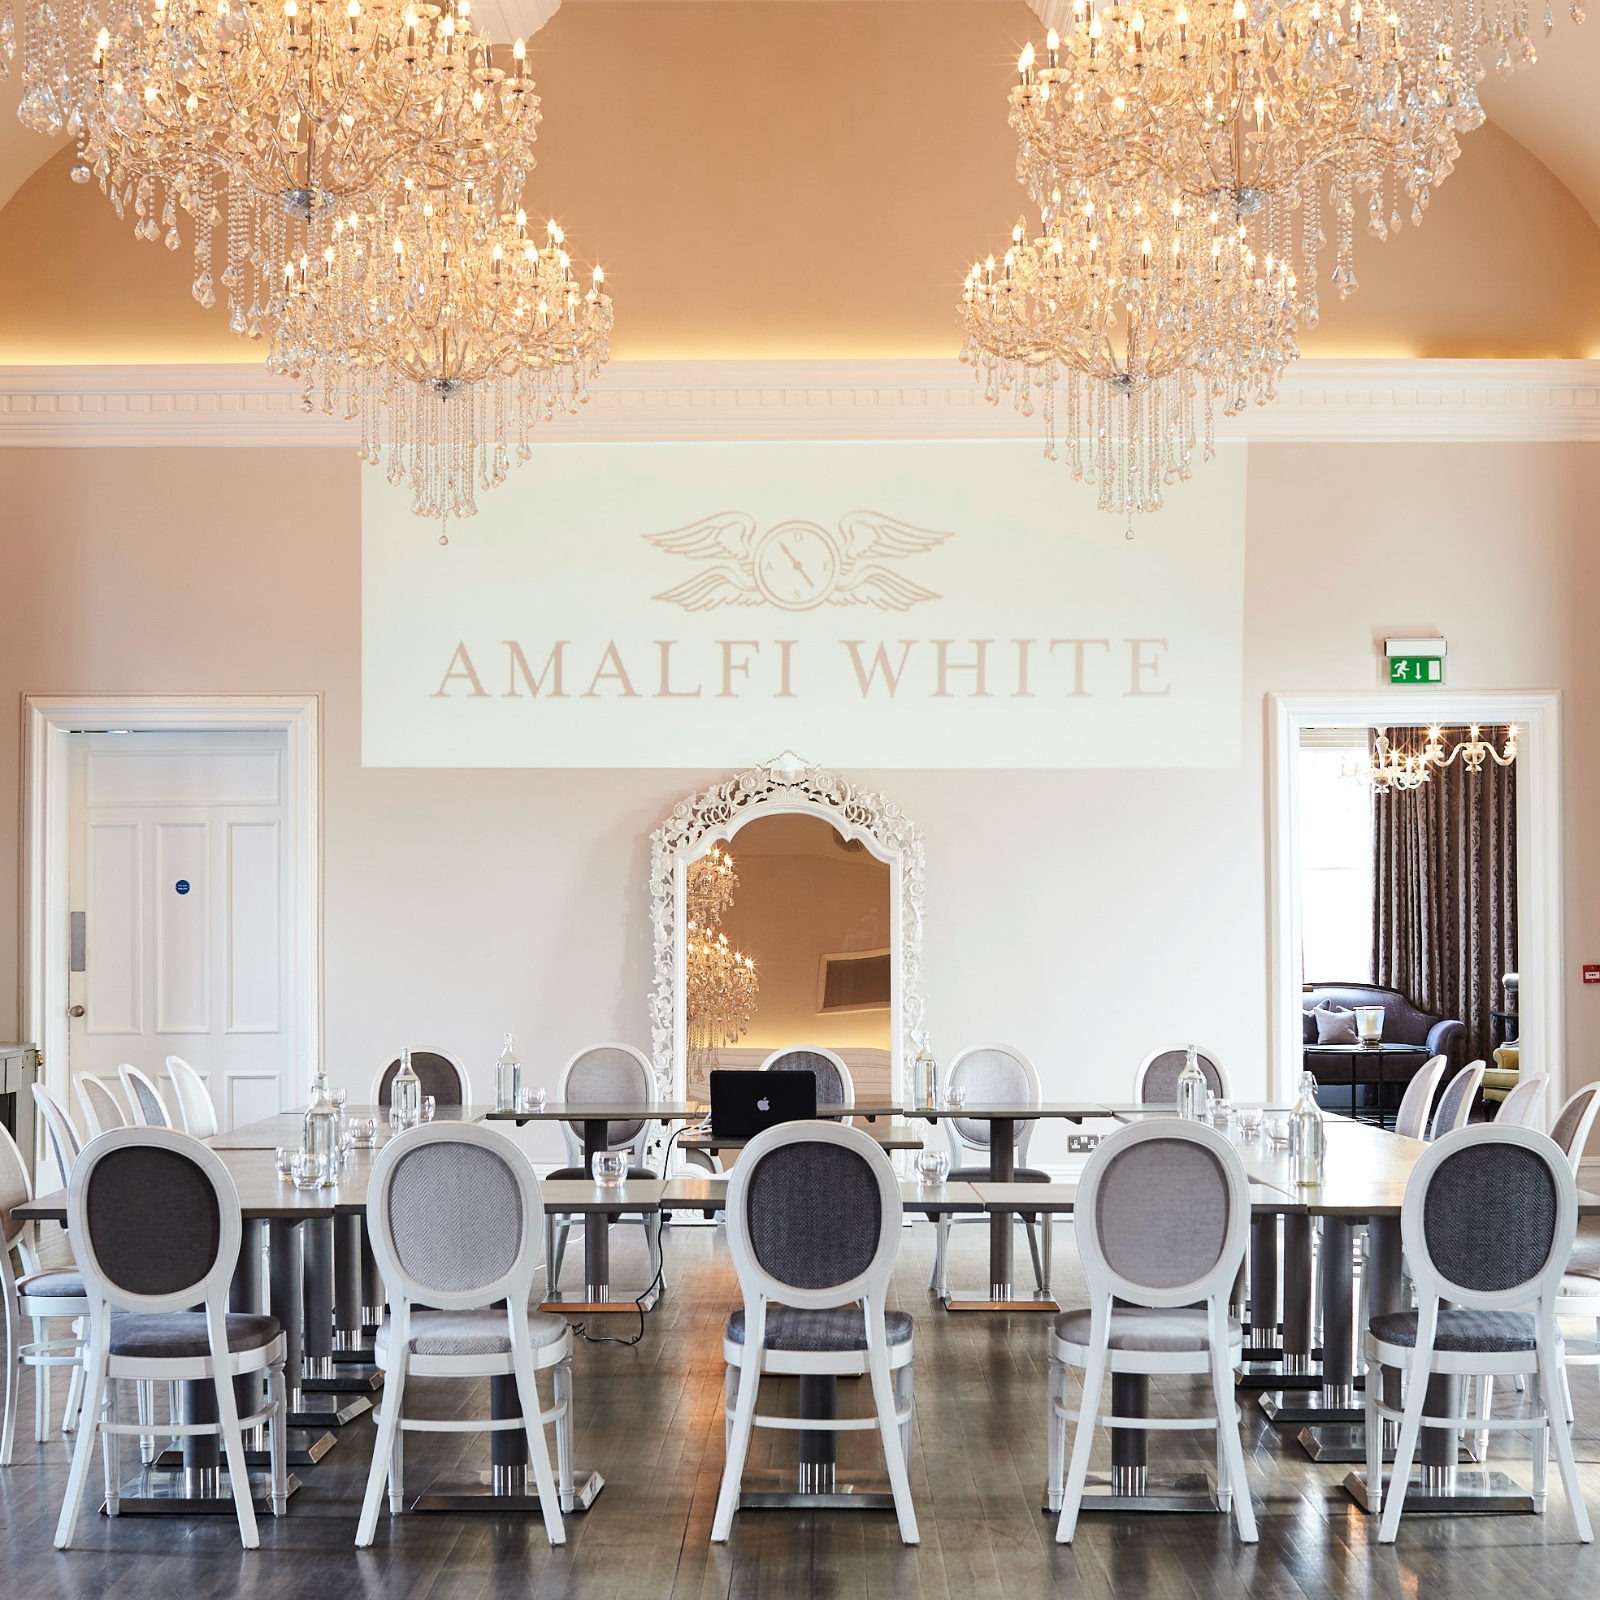 Business conferences held at Amalfi White